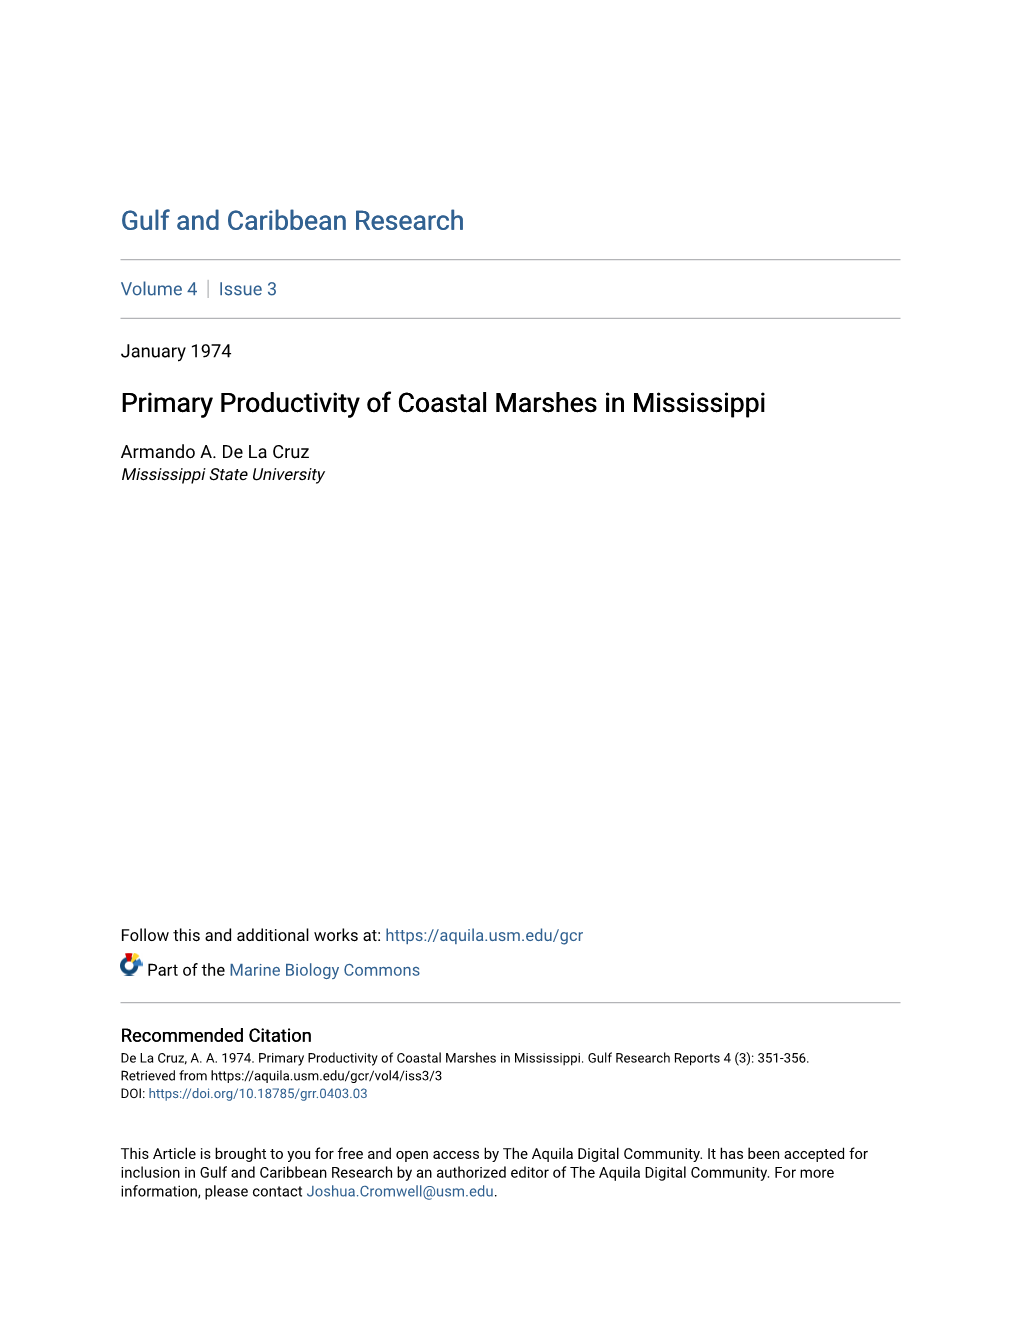 Primary Productivity of Coastal Marshes in Mississippi